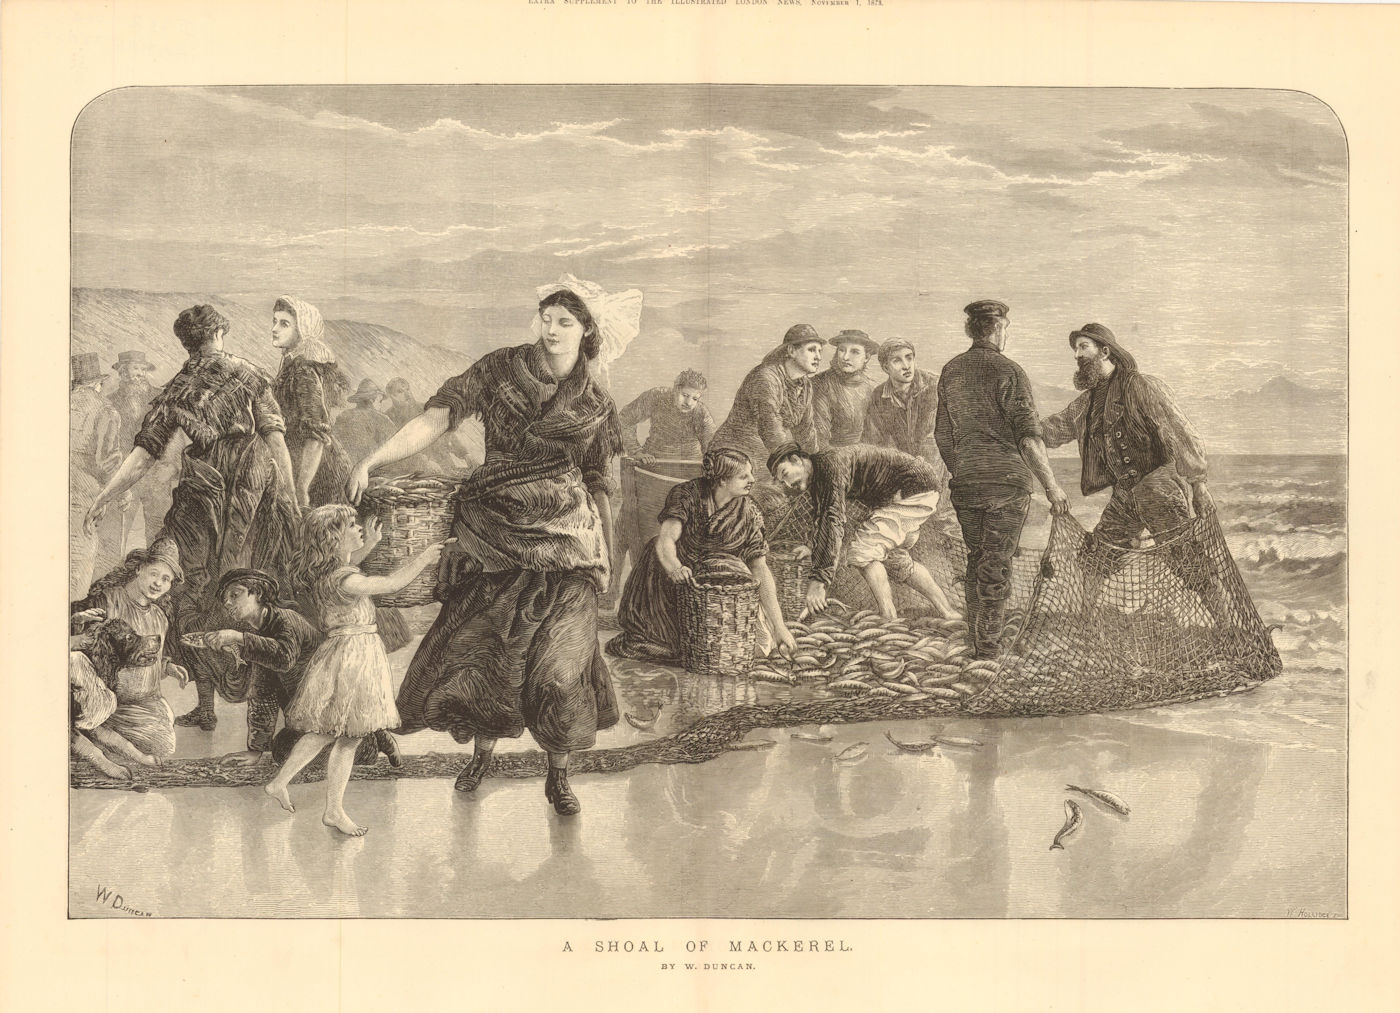 Associate Product A Shoal of Mackerel, by W Duncan. Fishermen. Catch 1873 old antique print